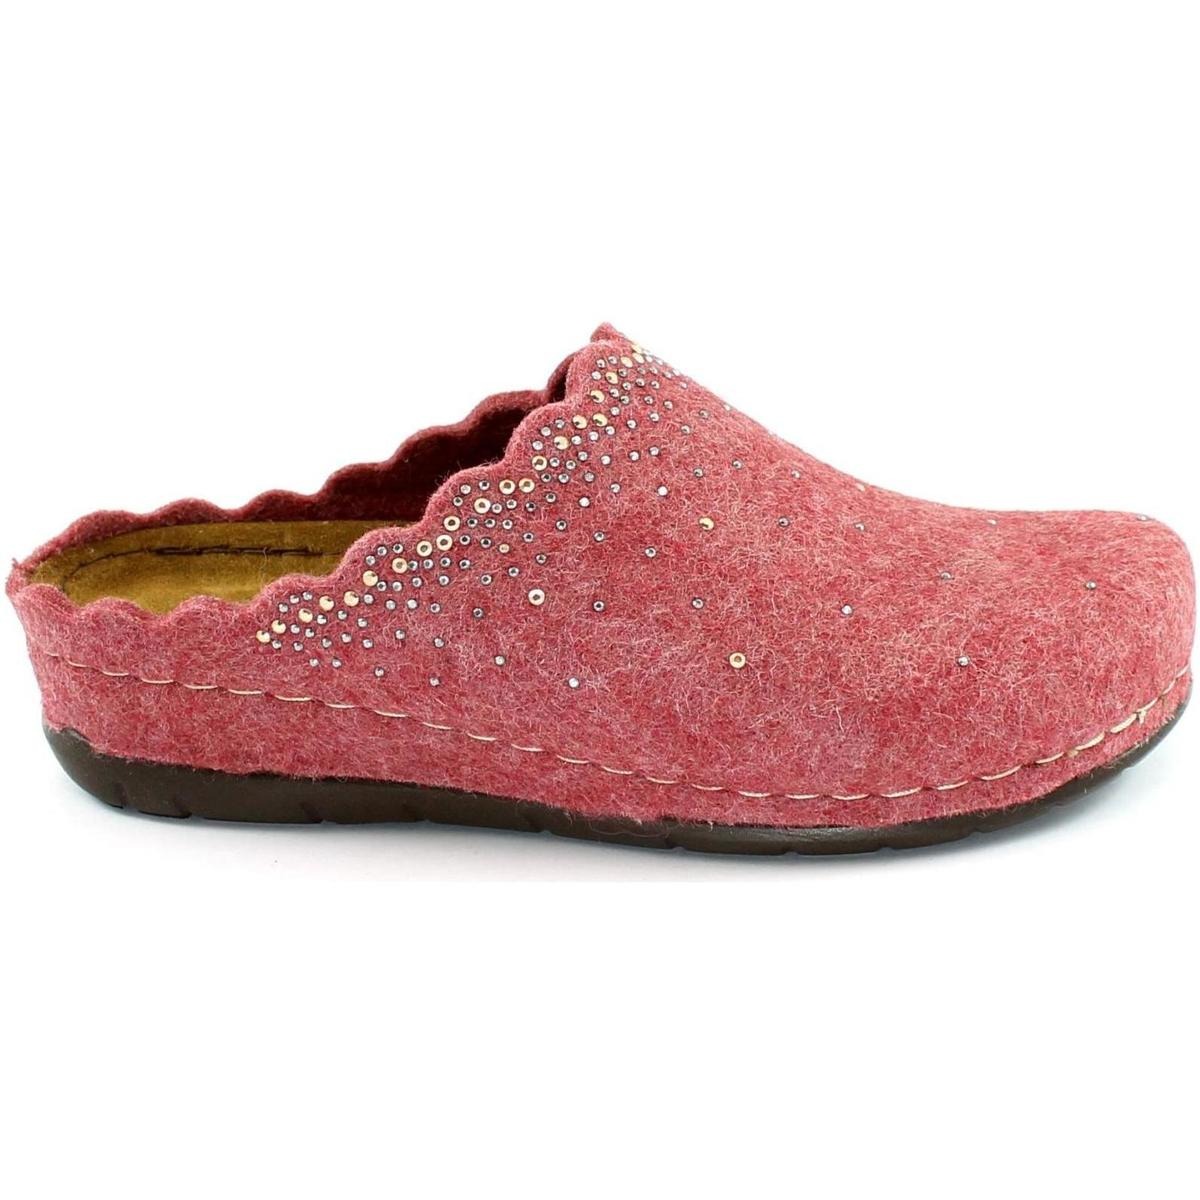 Woman Slippers in Red Grunland Spartoo GOOFASH